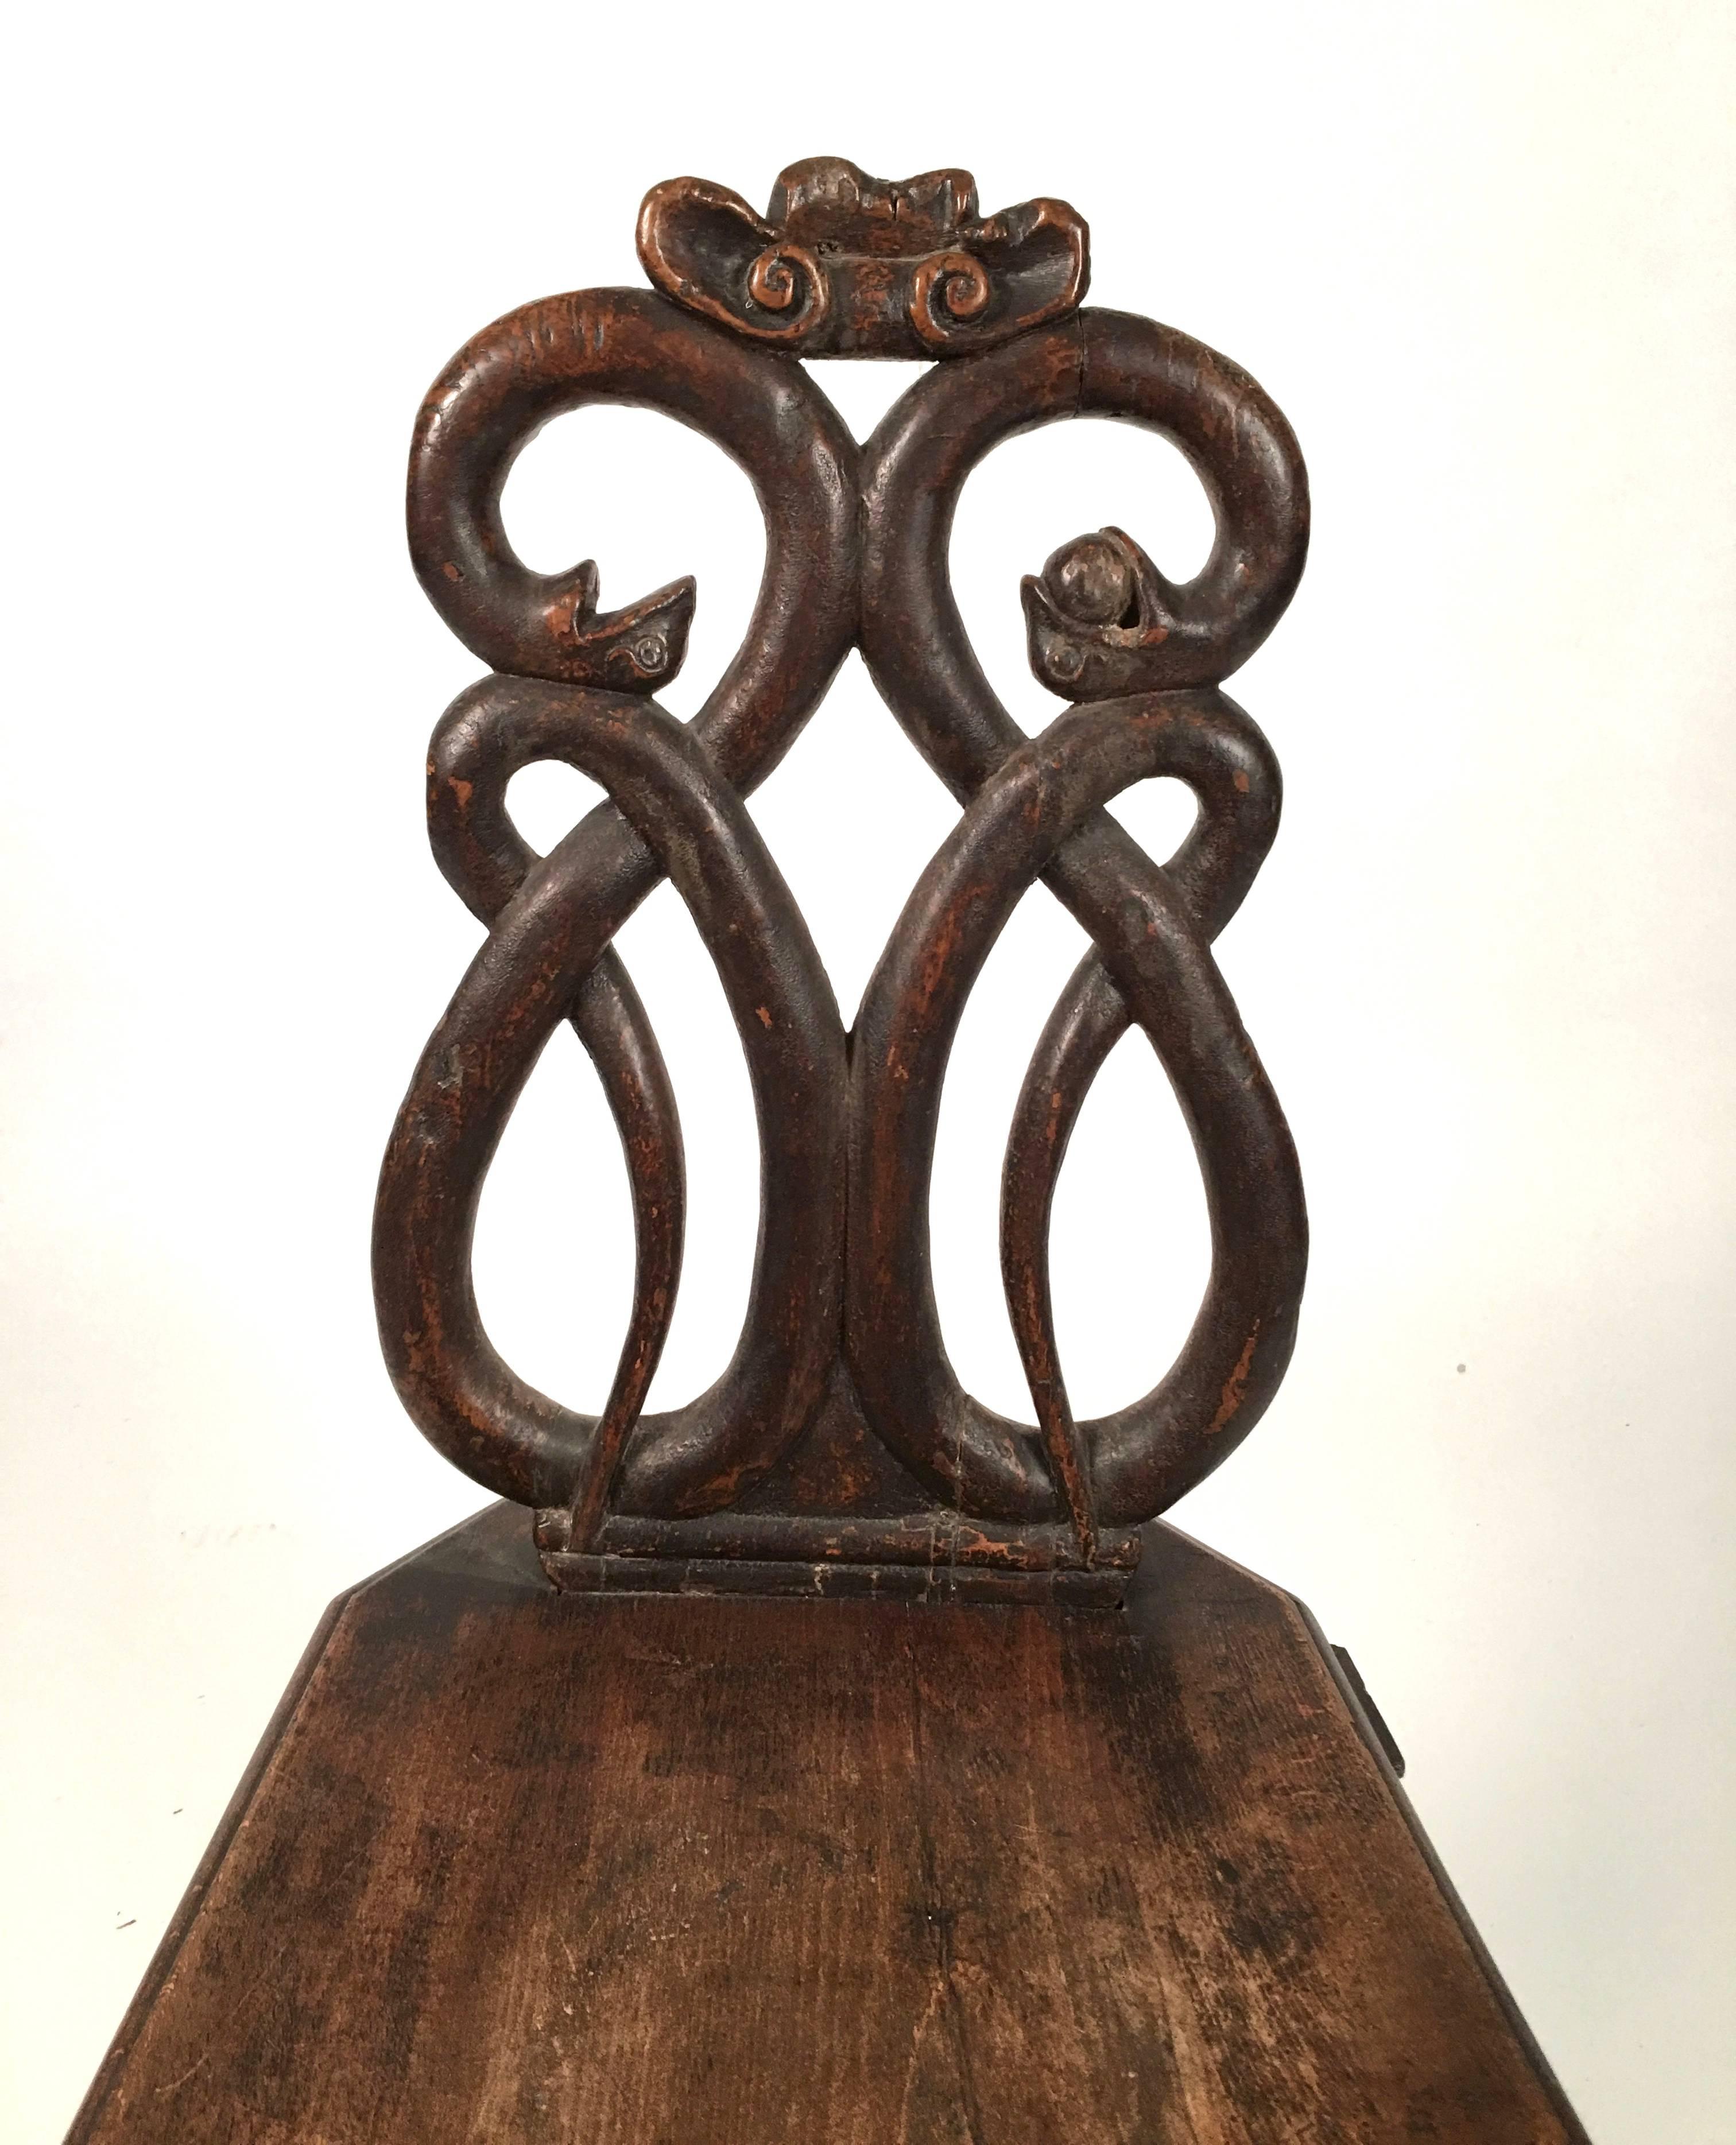 A striking carved walnut Baroque sgabello, or side chair, the back with a carved stylized shell over two intertwined snakes, one with an apple in its mouth, over a rectangular seat with canted corners, supported by four chamfered, splayed legs. The